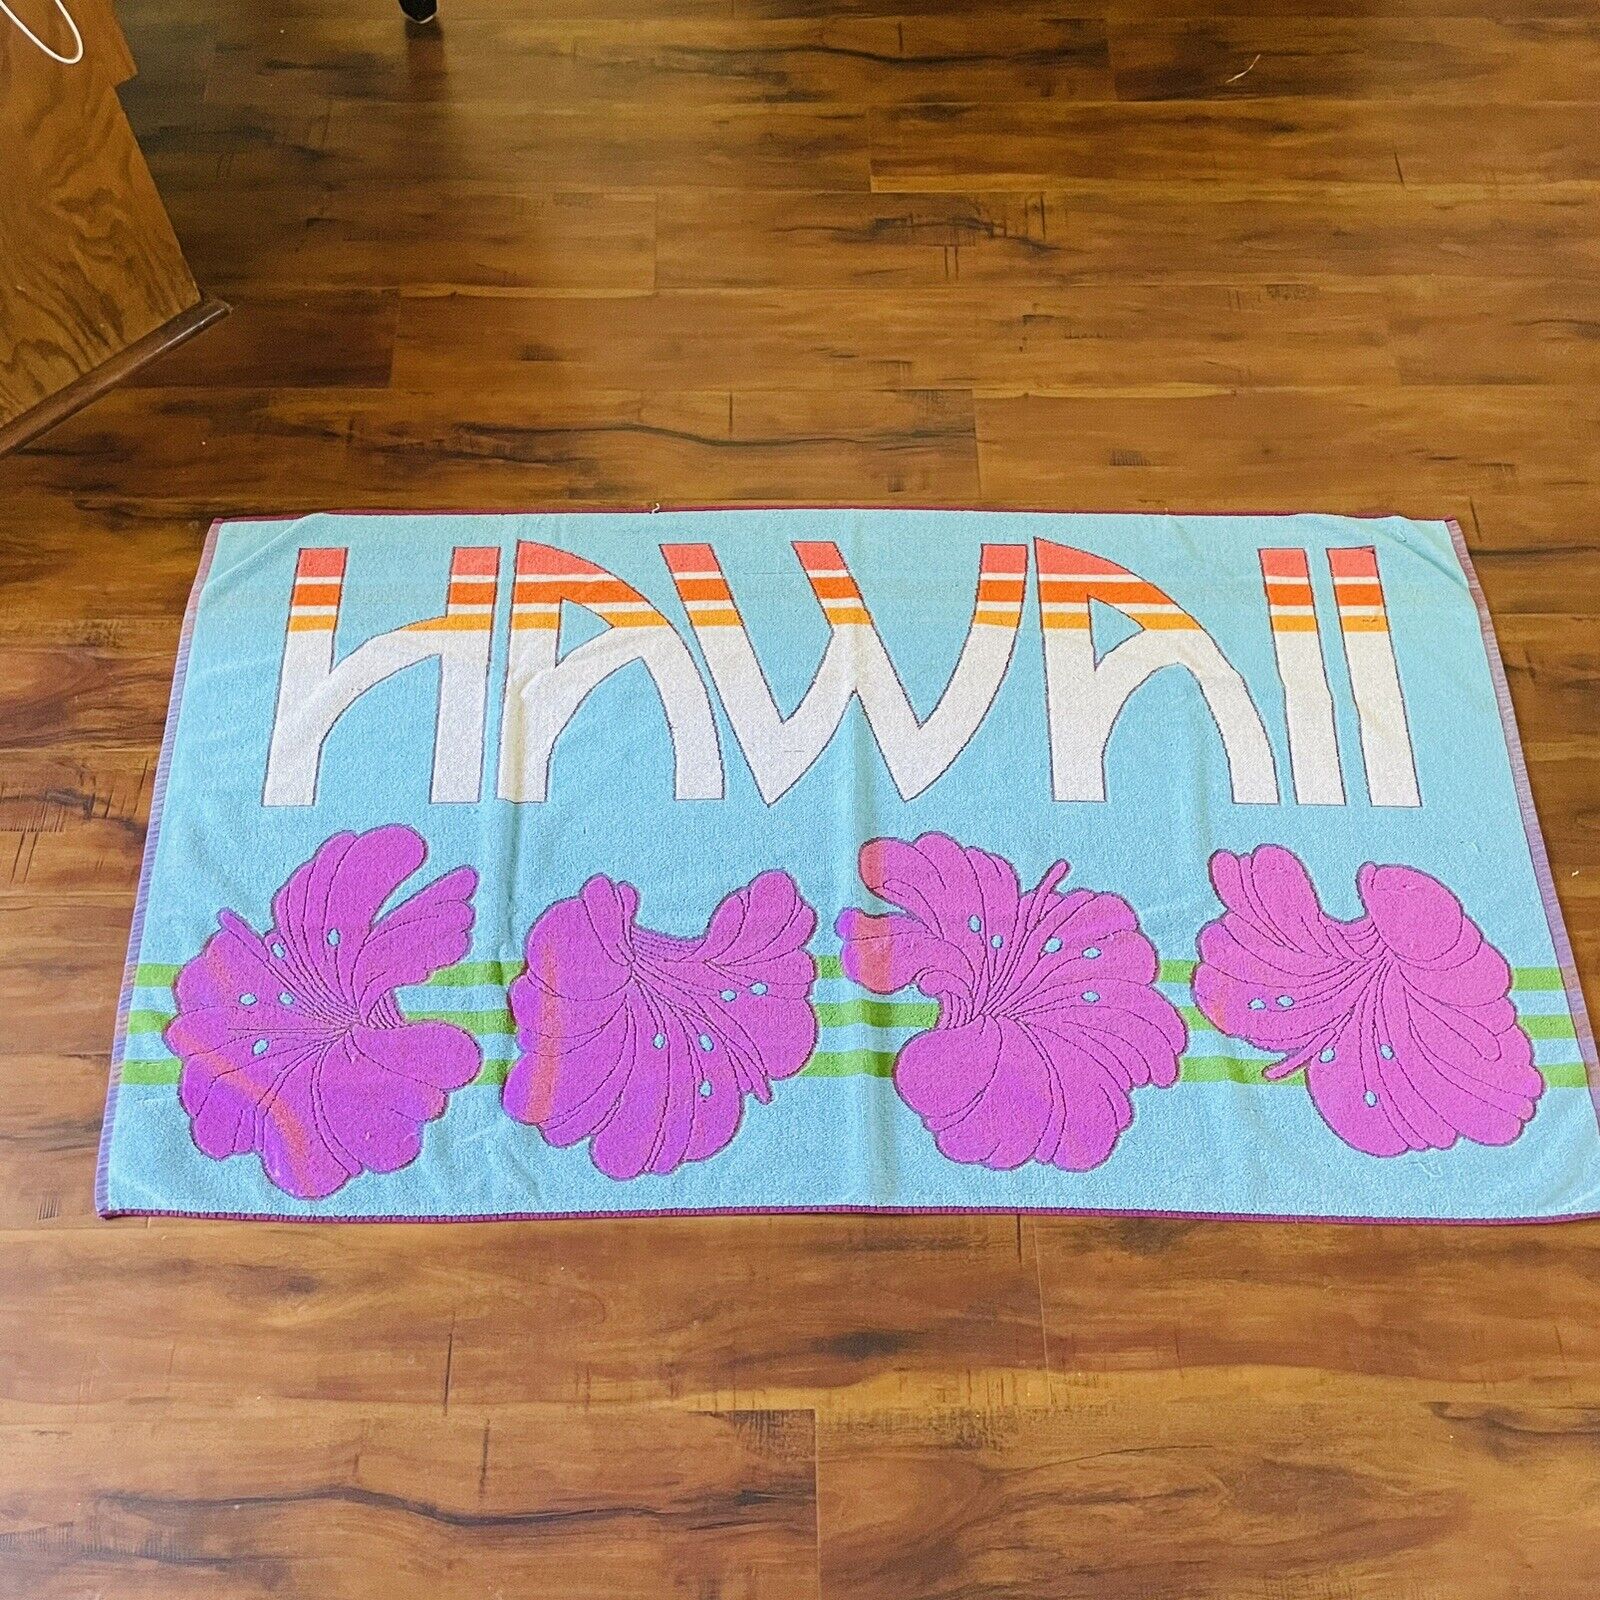 Vintage Royal Terry Beach Towel Hawaii Spellout Hibiscus Floral Made in Brazil